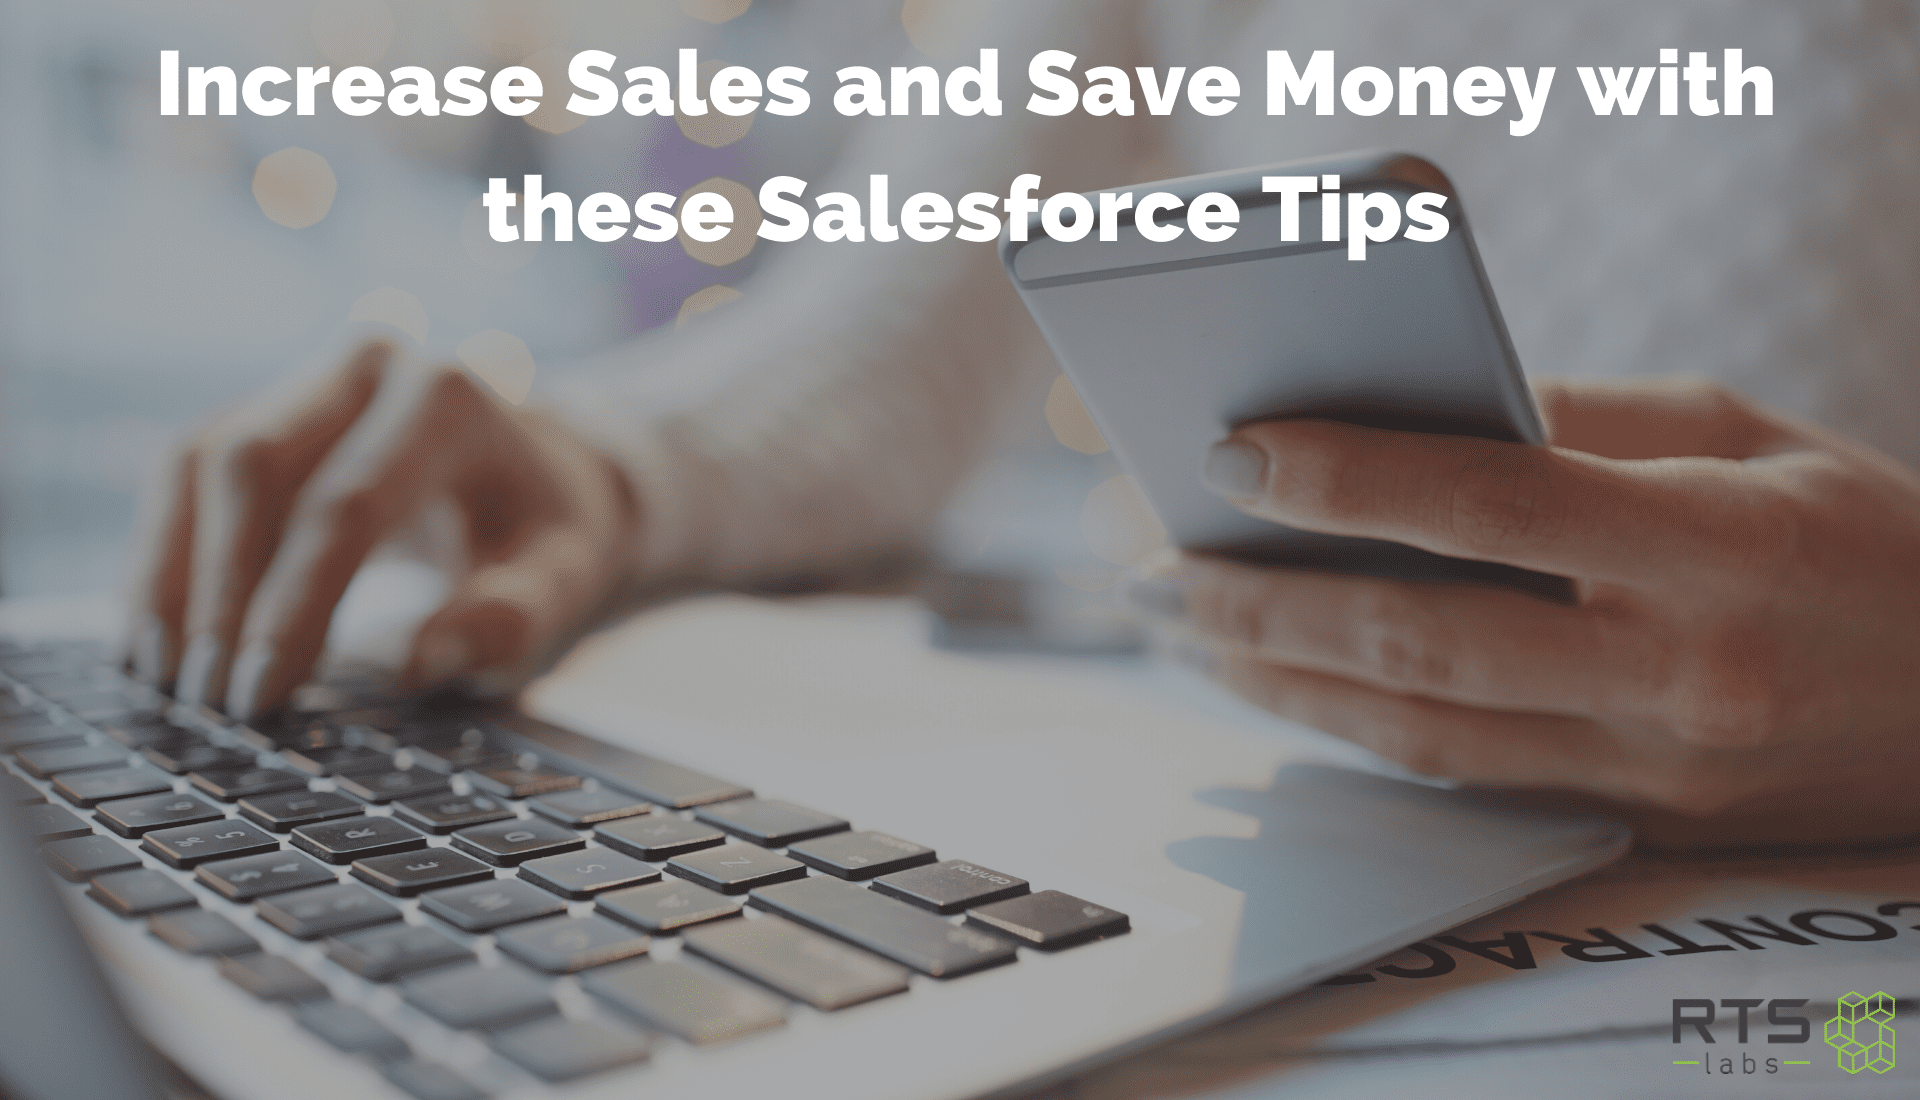 Salesforce tips to increase sales